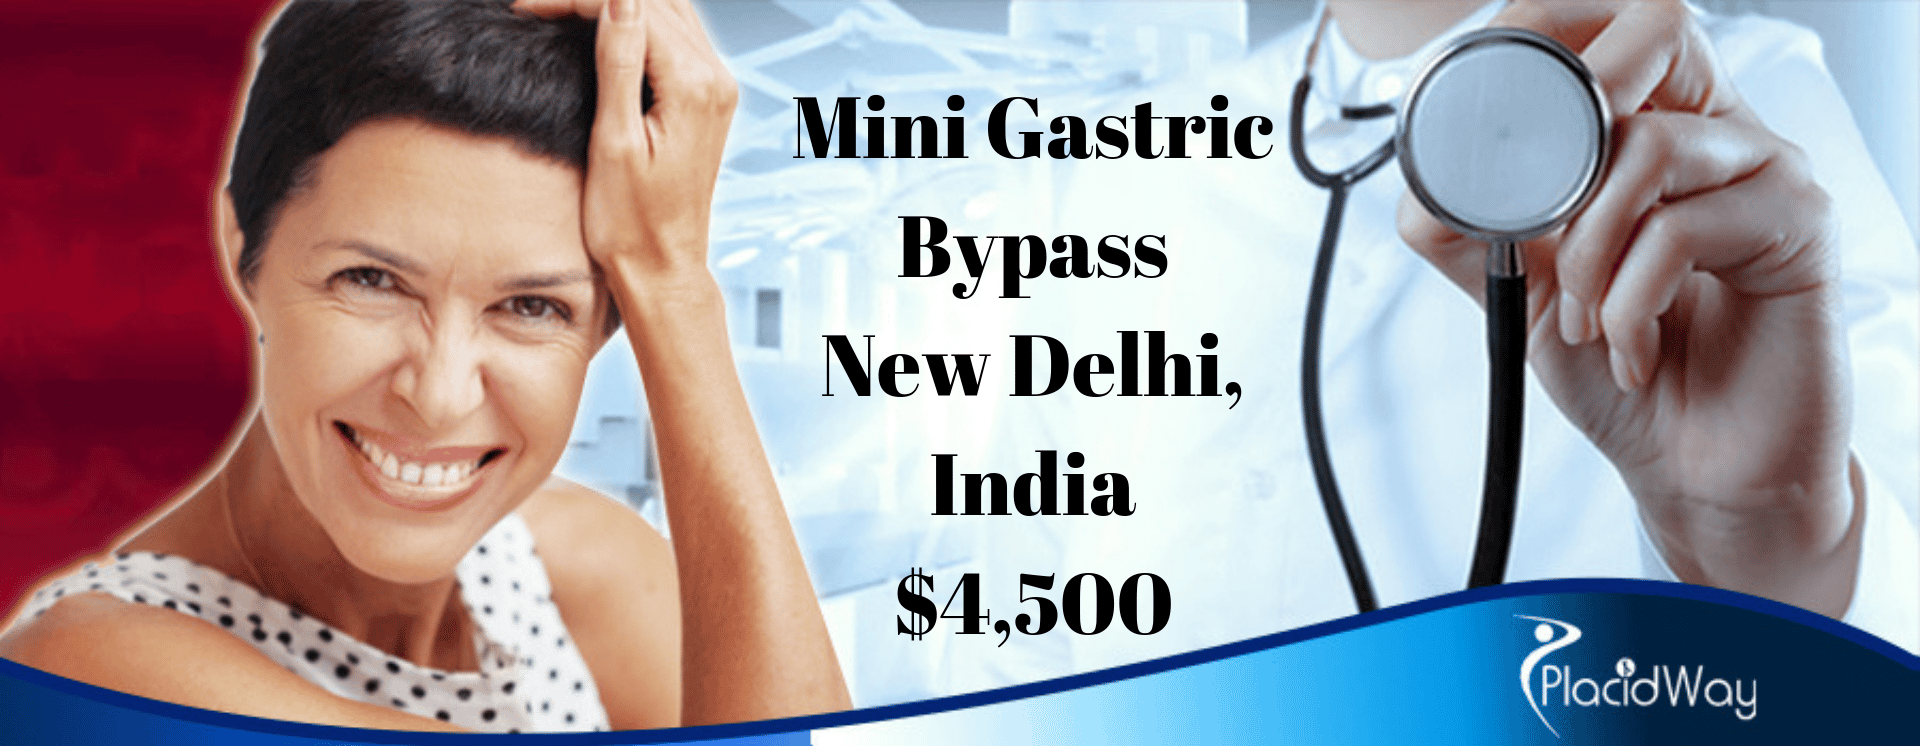 Mini Gastric Bypass Surgery Cost in India